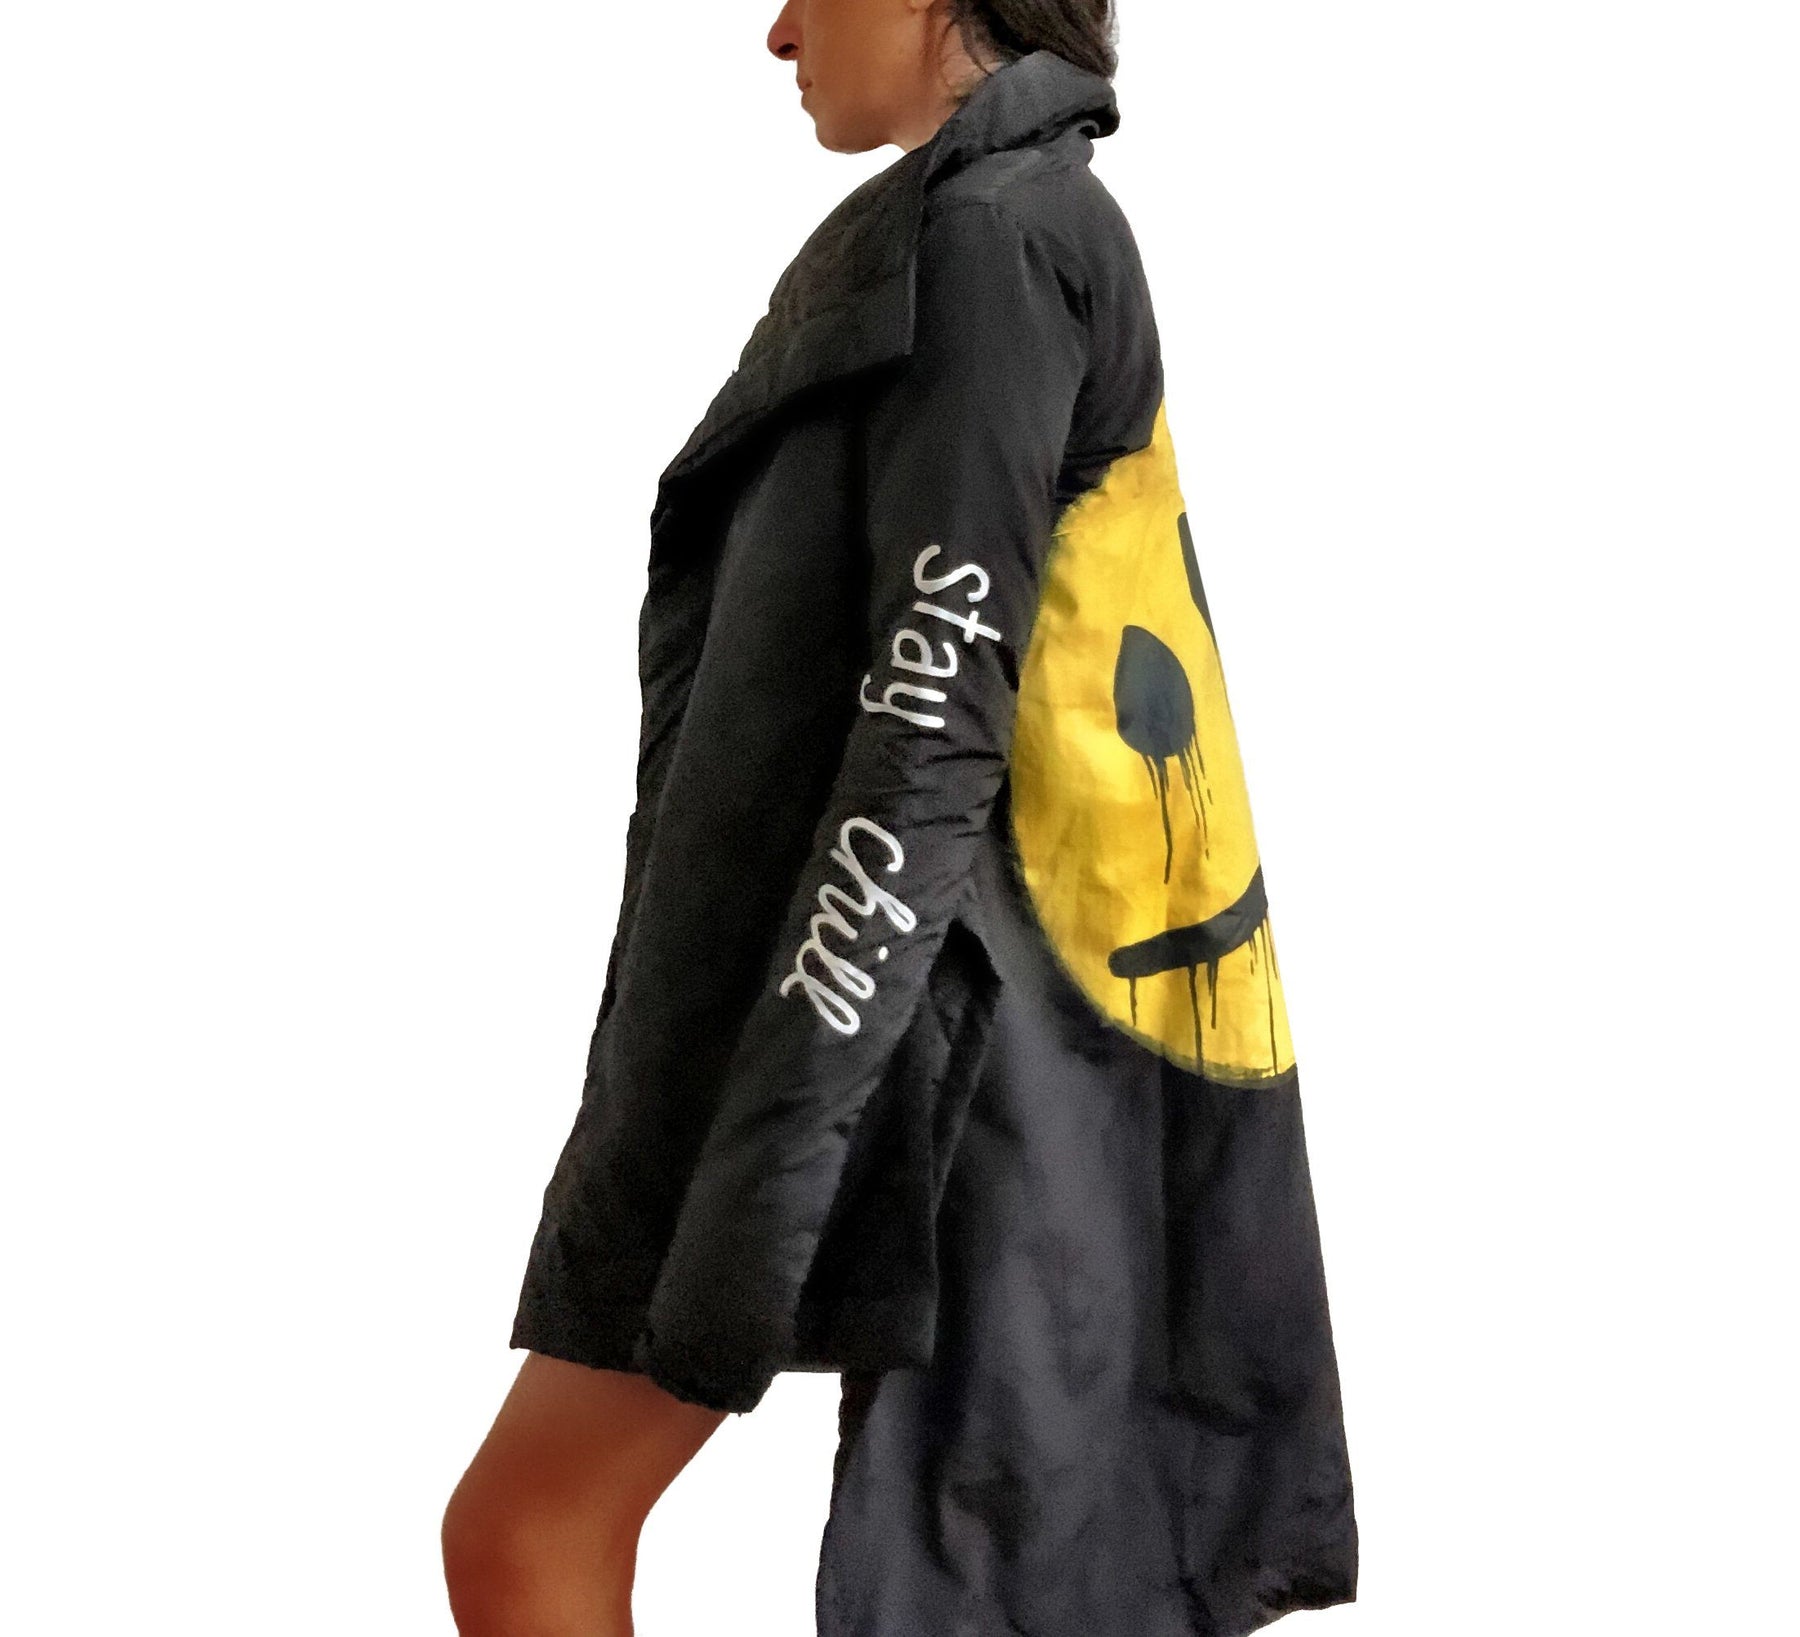 The COOLEST puffer jacket. Large smiley painted on back in yellow, with black drip eyes and mouth. STAY CHILL painted in white on sleeve. Signed @wrenandglory.